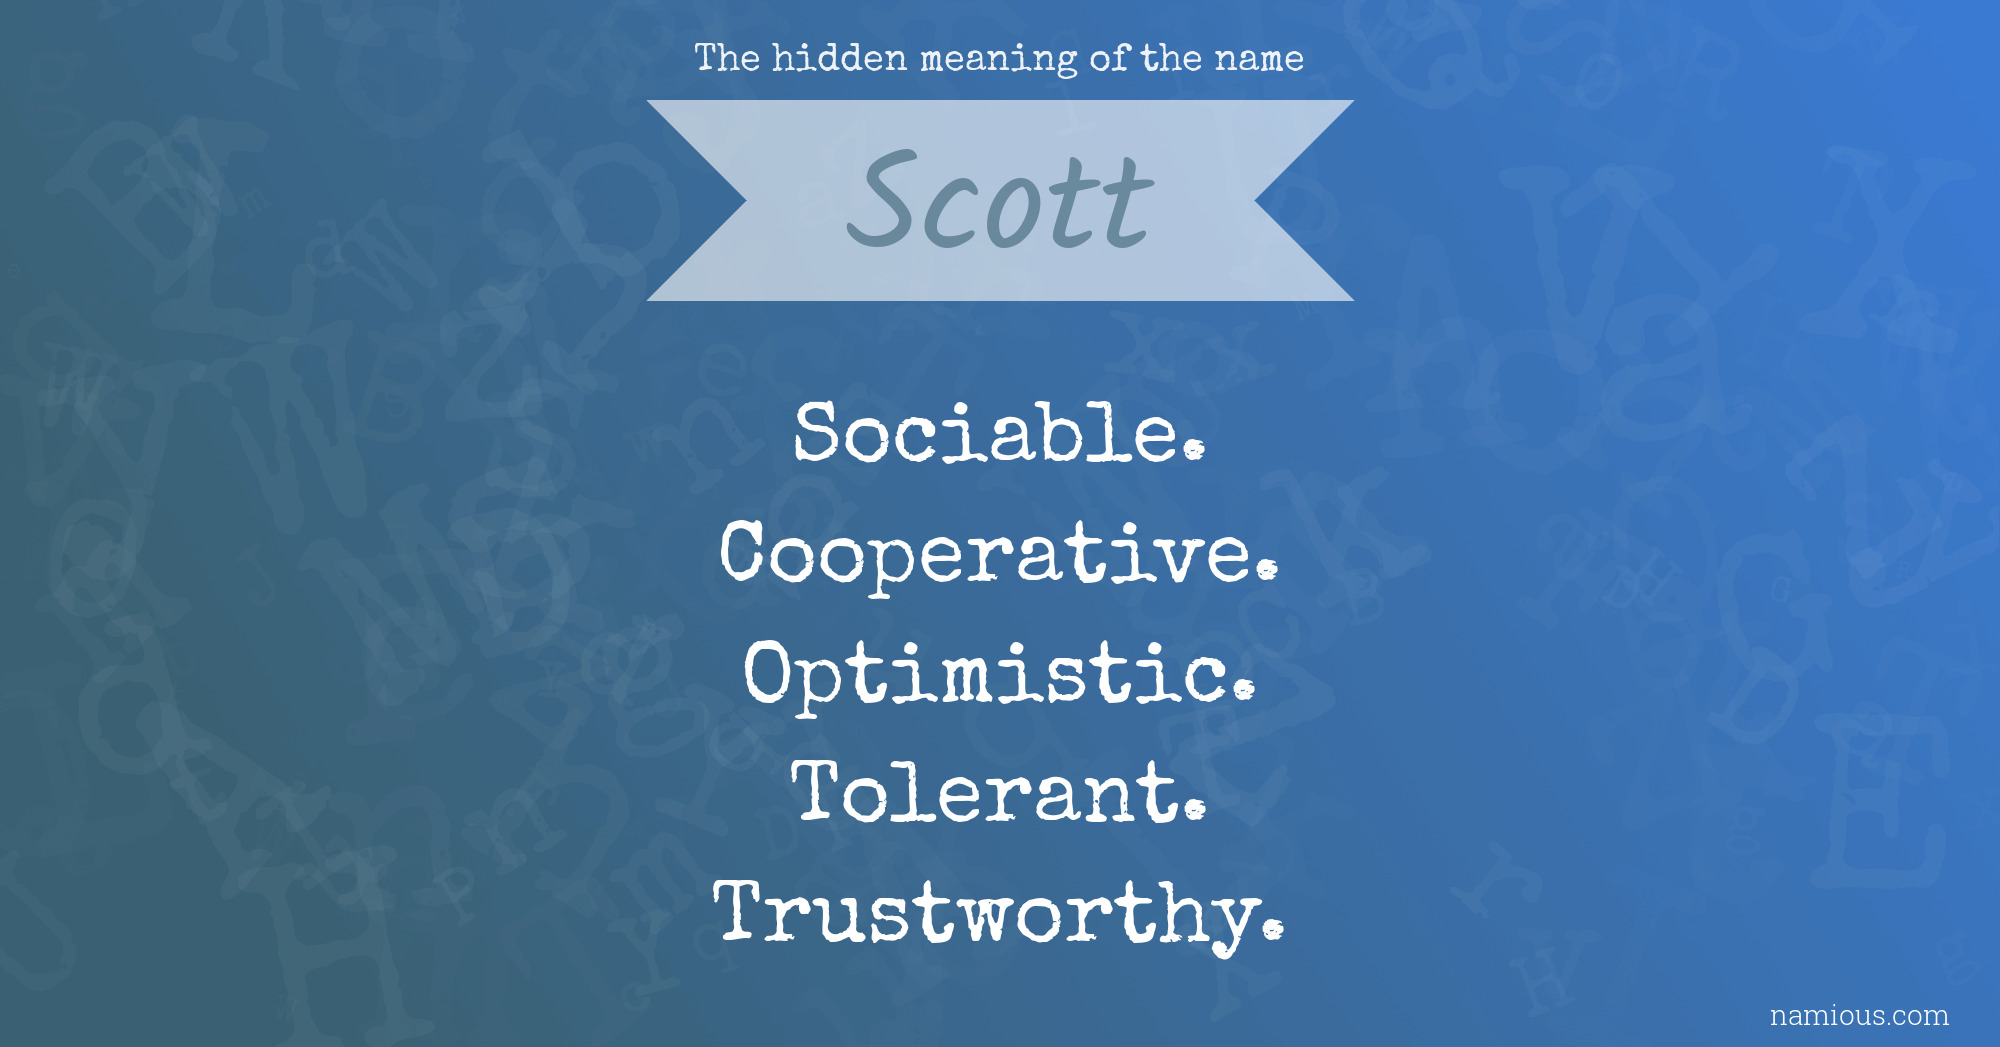 The hidden meaning of the name Scott